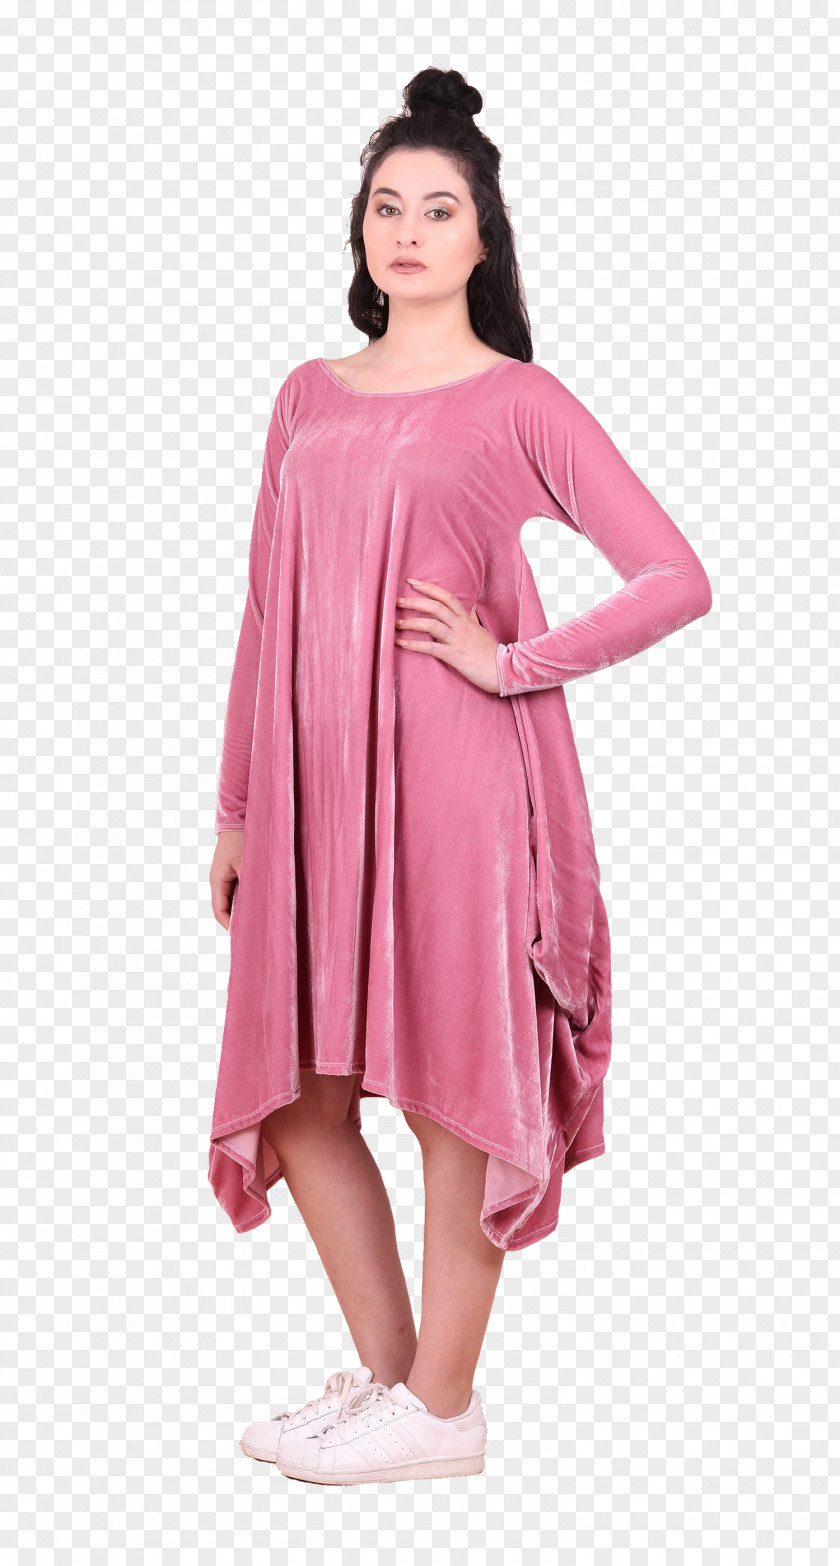 Clothing Material Dress Robe Sleeve Pants PNG